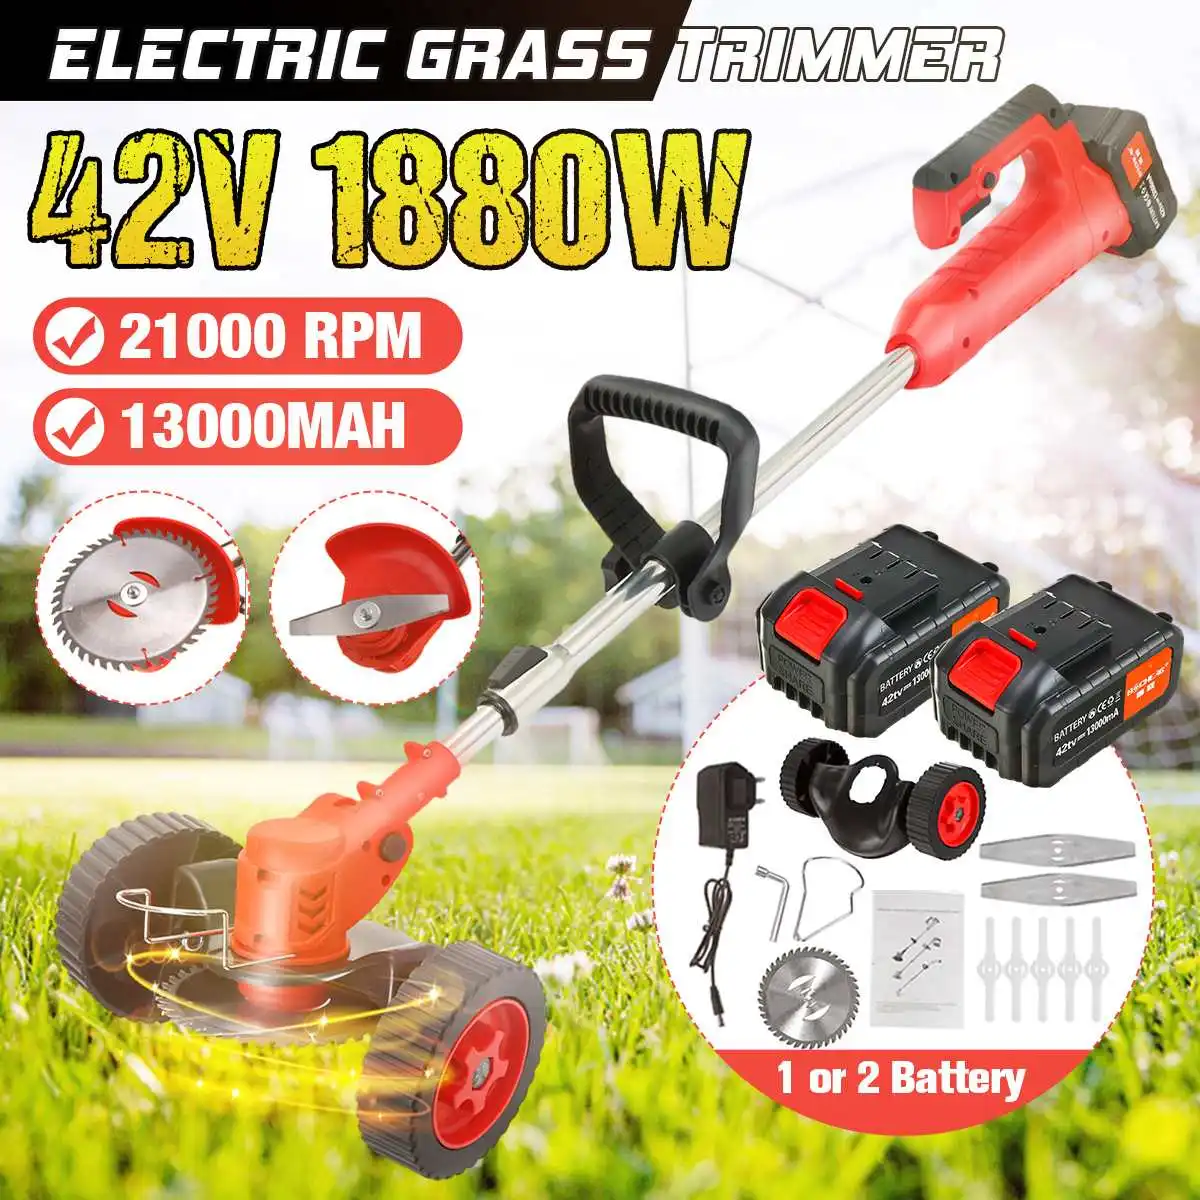 42V 1880W Electric Cordless Grass Trimmer 13000mAh Lawn Mower Hedge Trimmer Adjustable Handheld Garden Pruning Power Tools